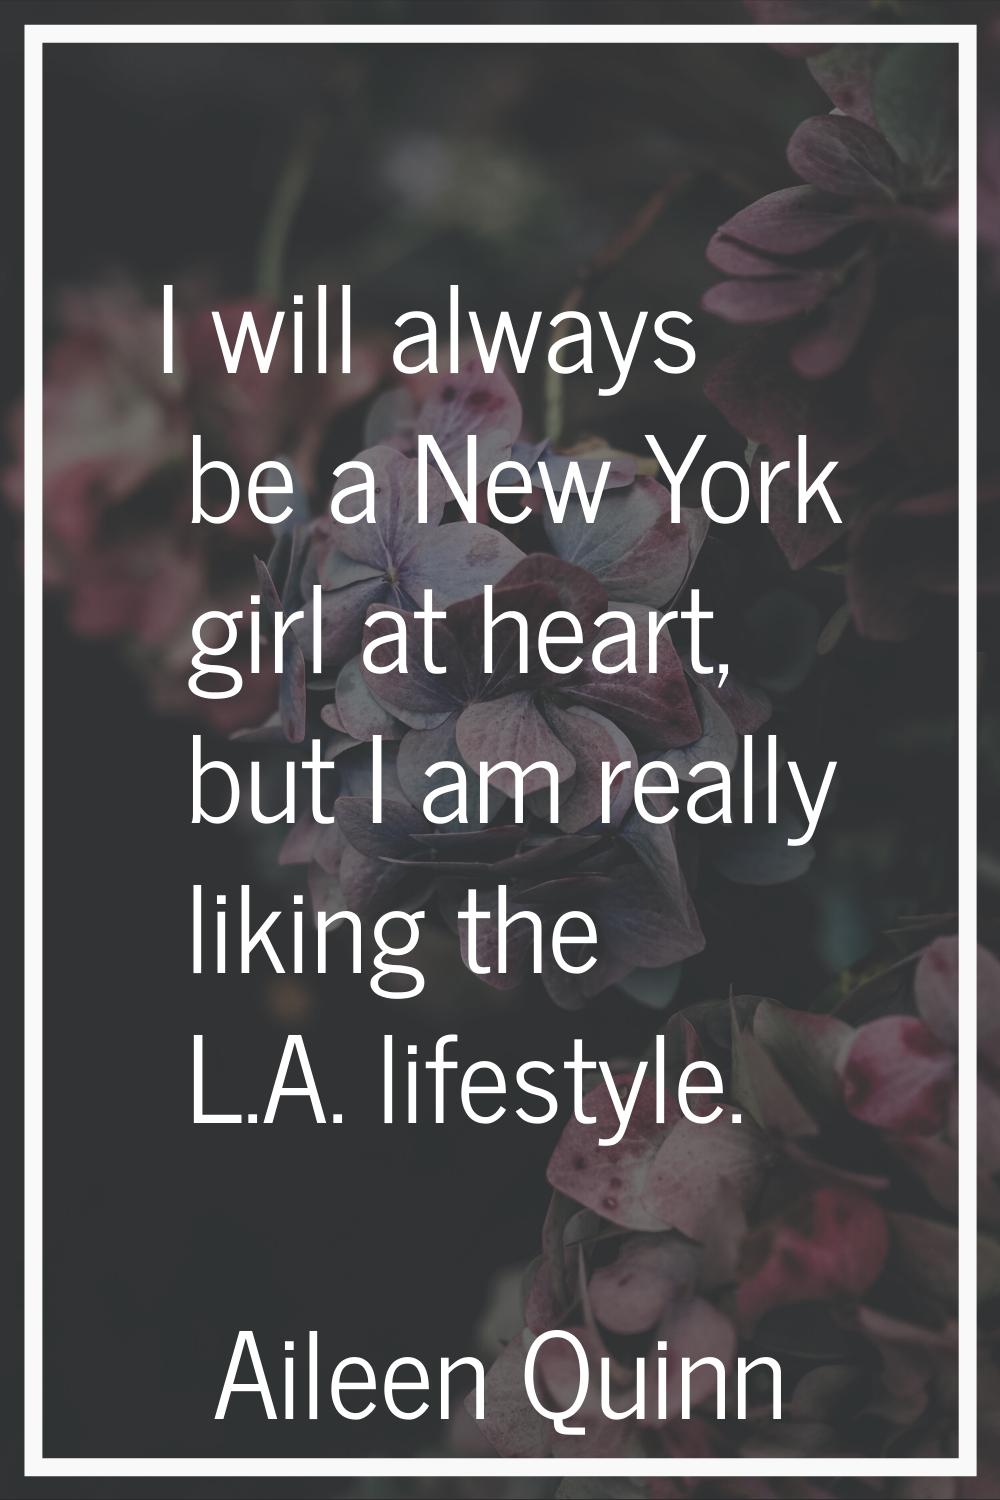 I will always be a New York girl at heart, but I am really liking the L.A. lifestyle.